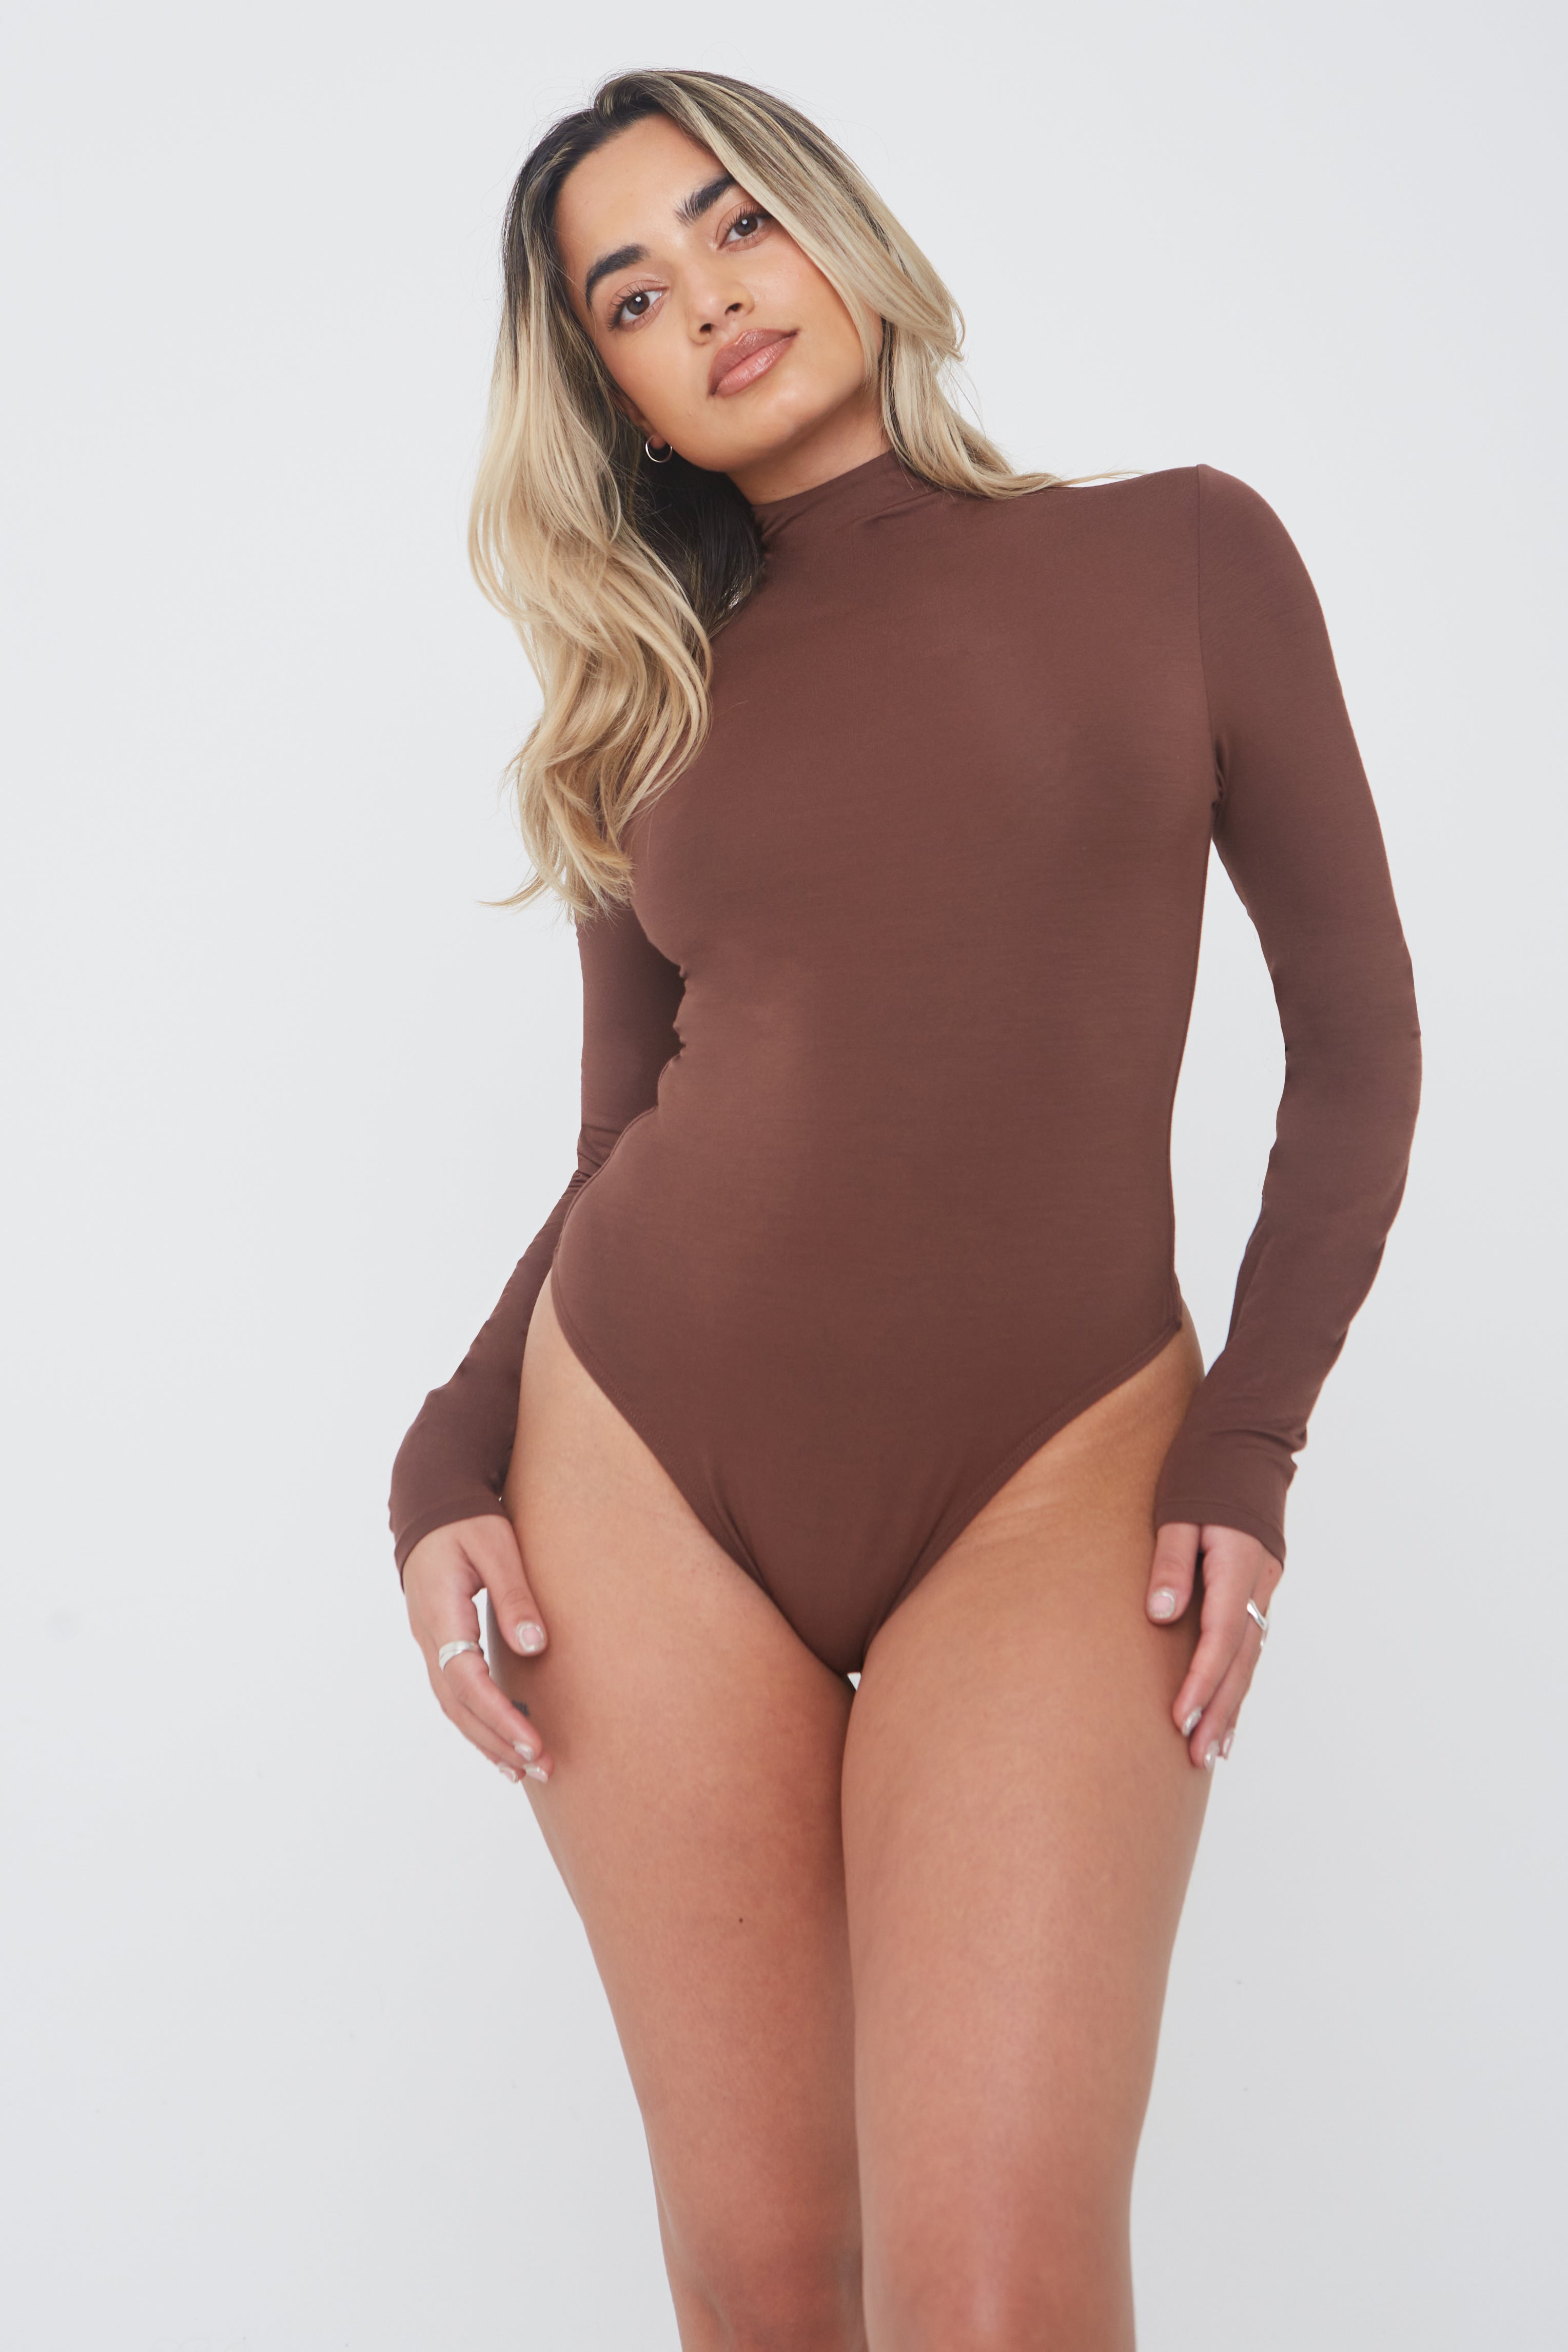 skims seamless sculpt collection is so buttery & flattering — wearing the sculpting  thong bodysuit in cocoa and feeling so confident…